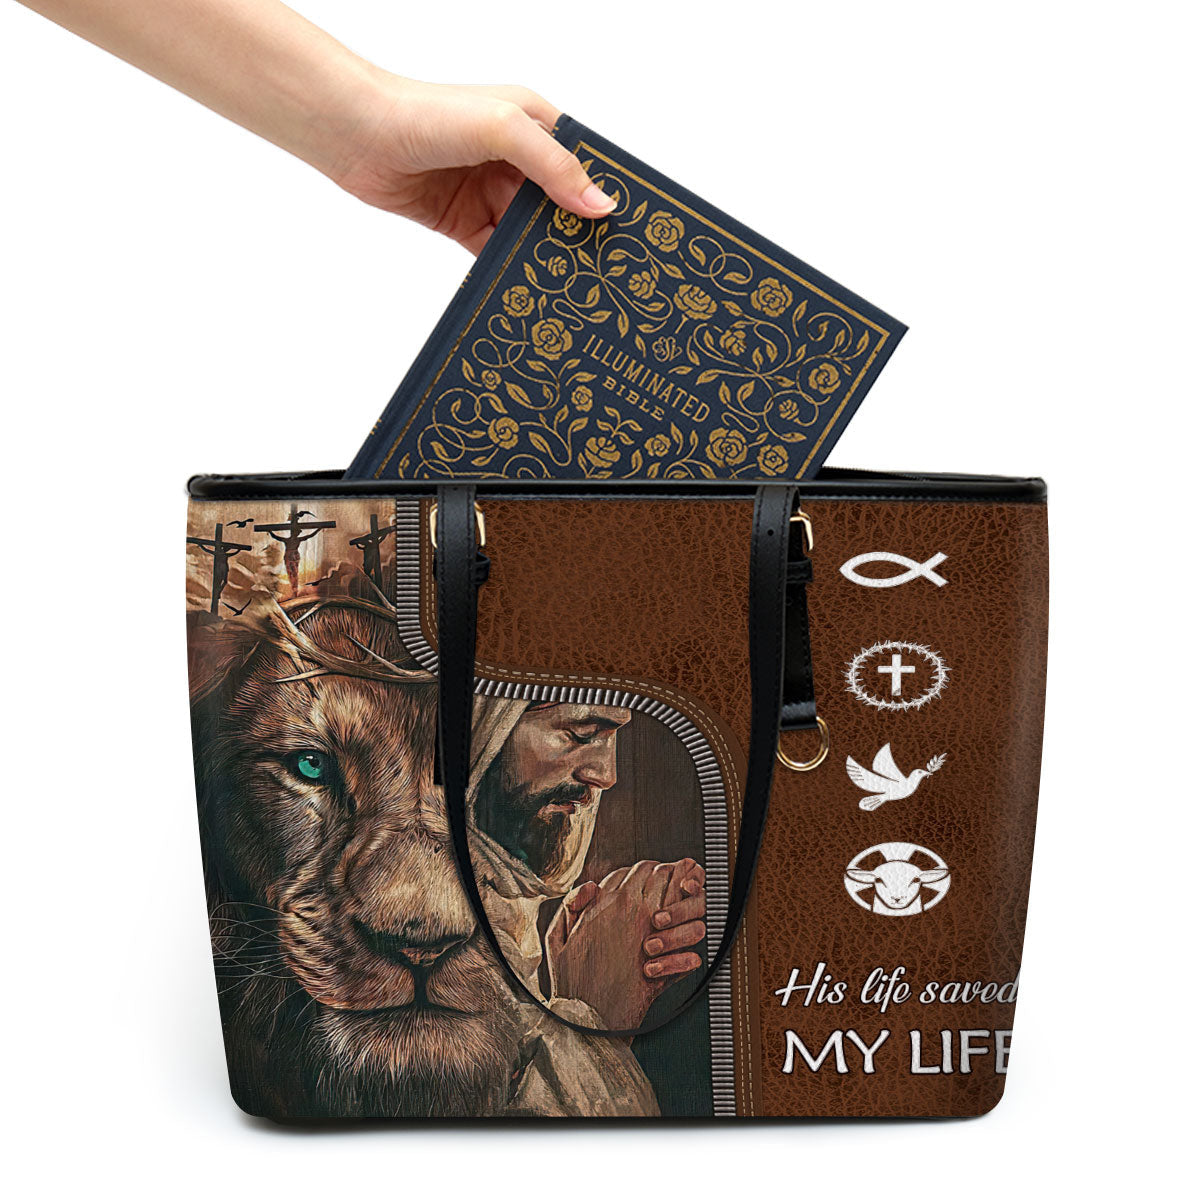 His Life Saved My Life Lion Large Leather Tote Bag - Christ Gifts For Religious Women - Best Mother's Day Gifts